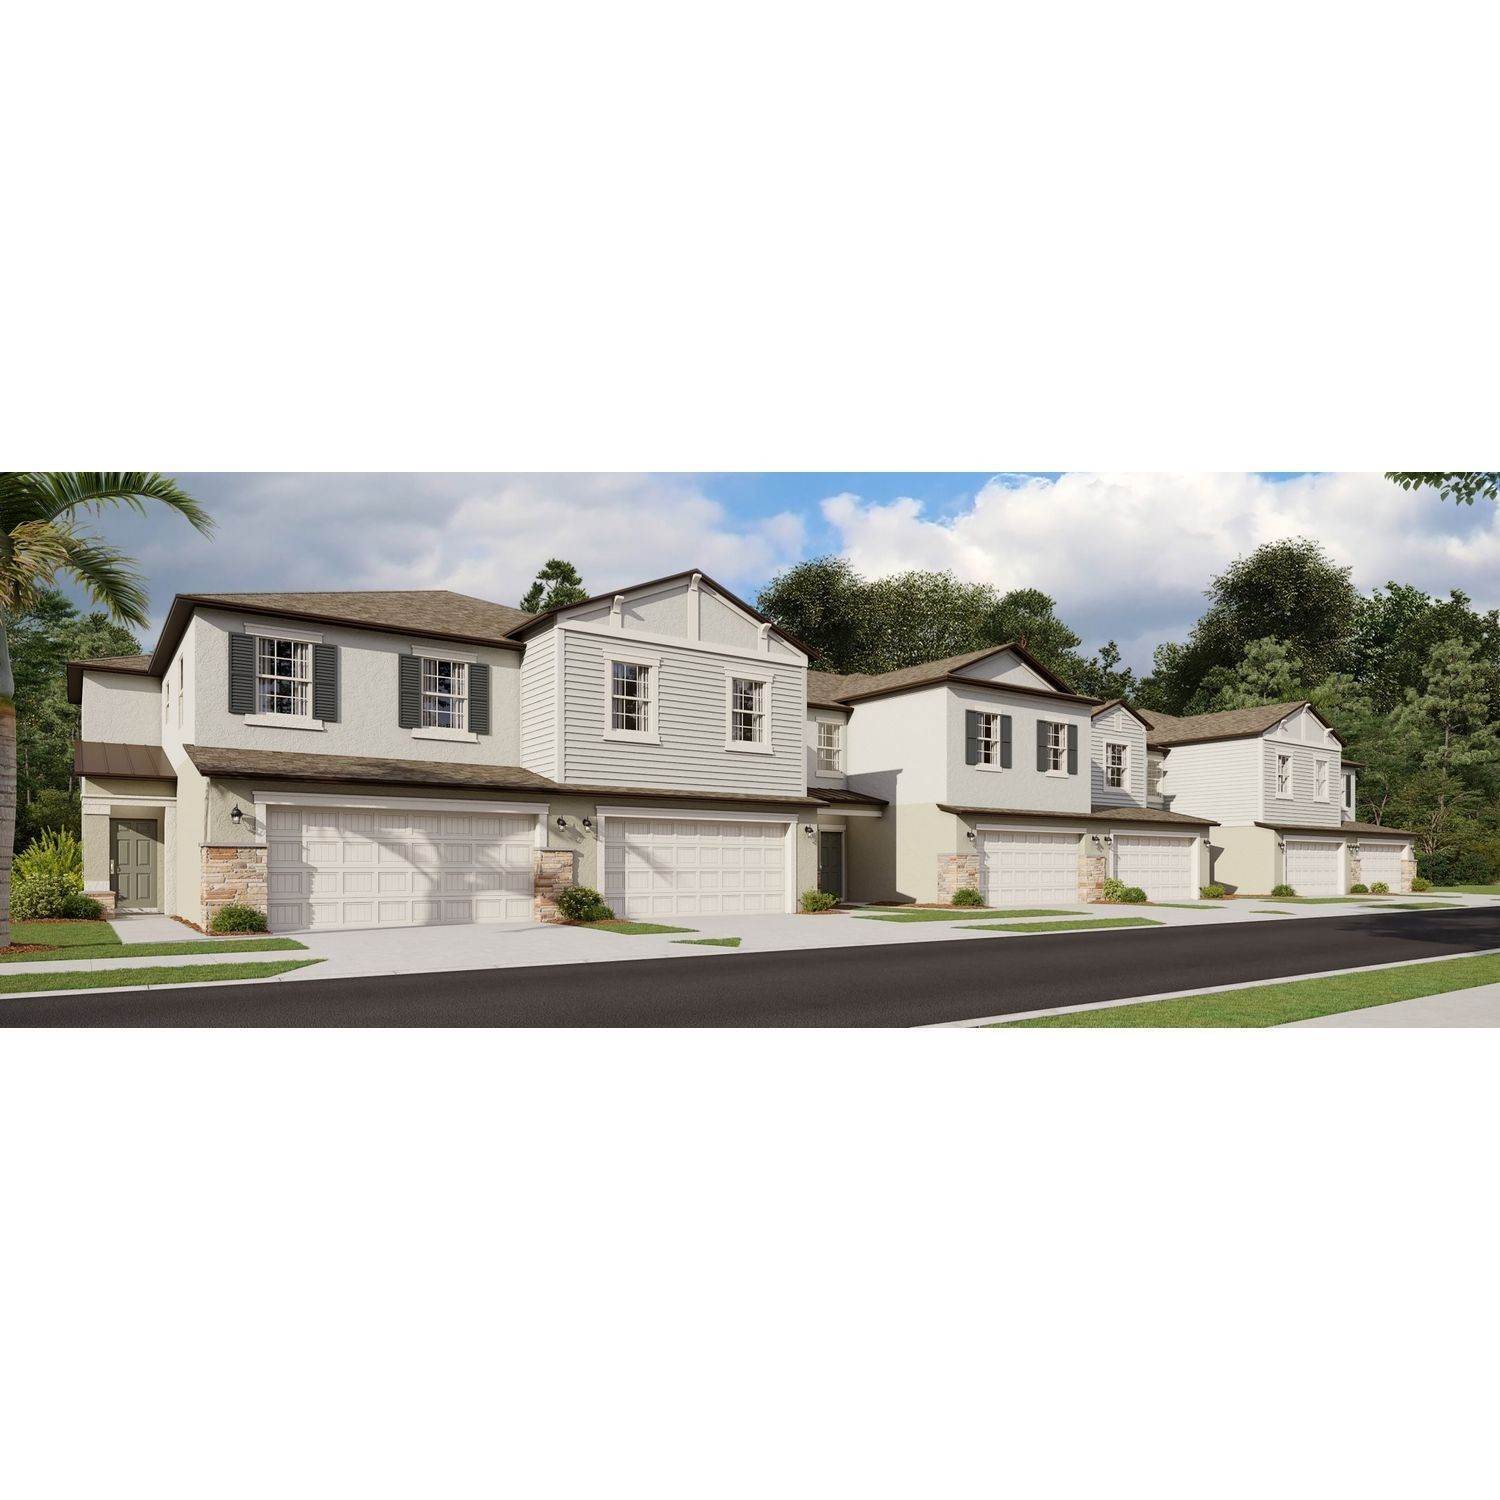 2. Townes at Lake Thomas - The Townhomes bâtiment à 21415 Darter Road, Land O' Lakes, FL 34638